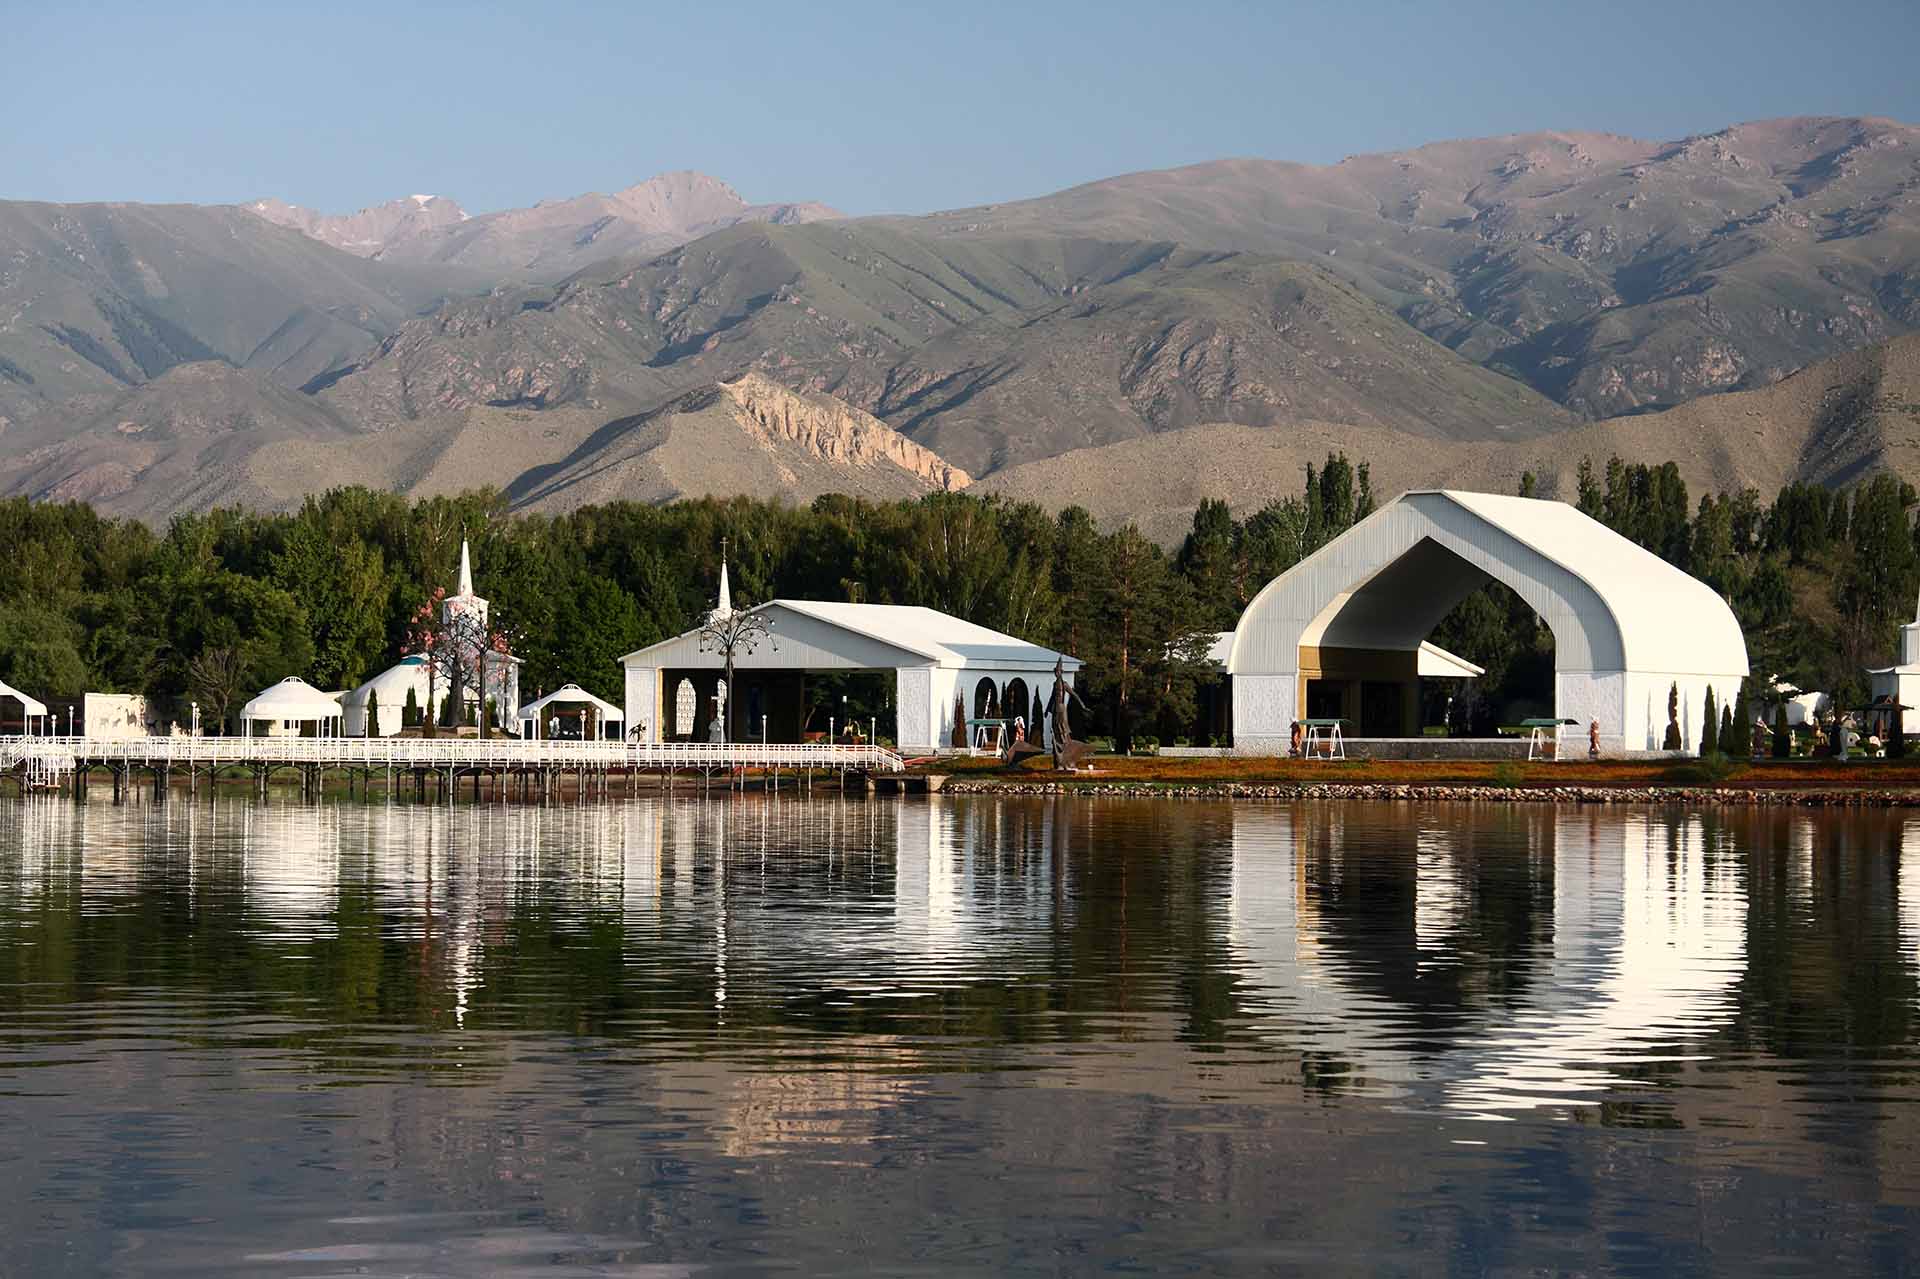 Architectural complex on the bank of mountain lake.Kyrgyzstan. Lake Issyk-kul